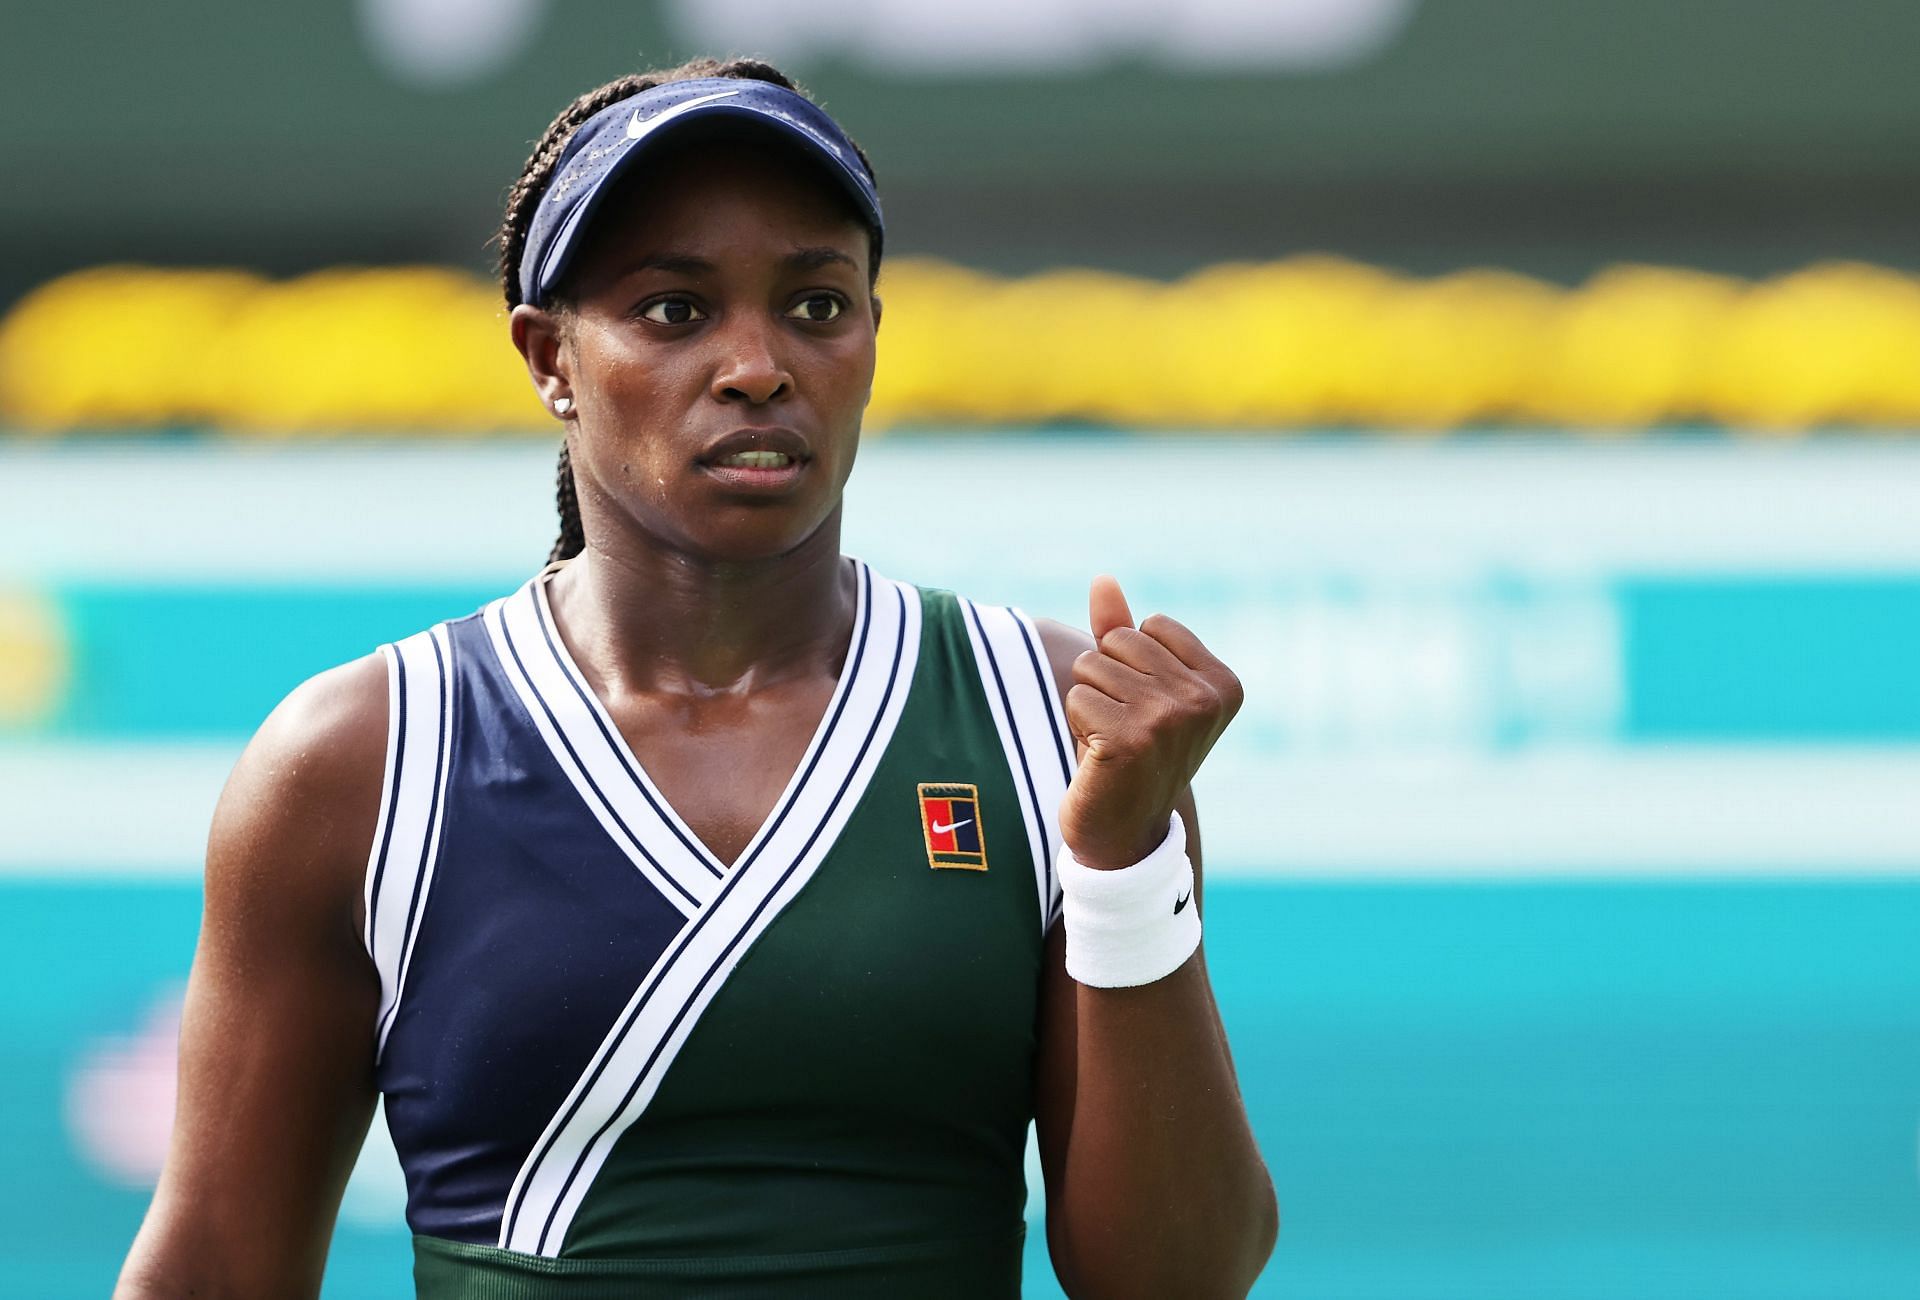 Sloane Stephens is on the entry list for the 2022 Indian Wells Open